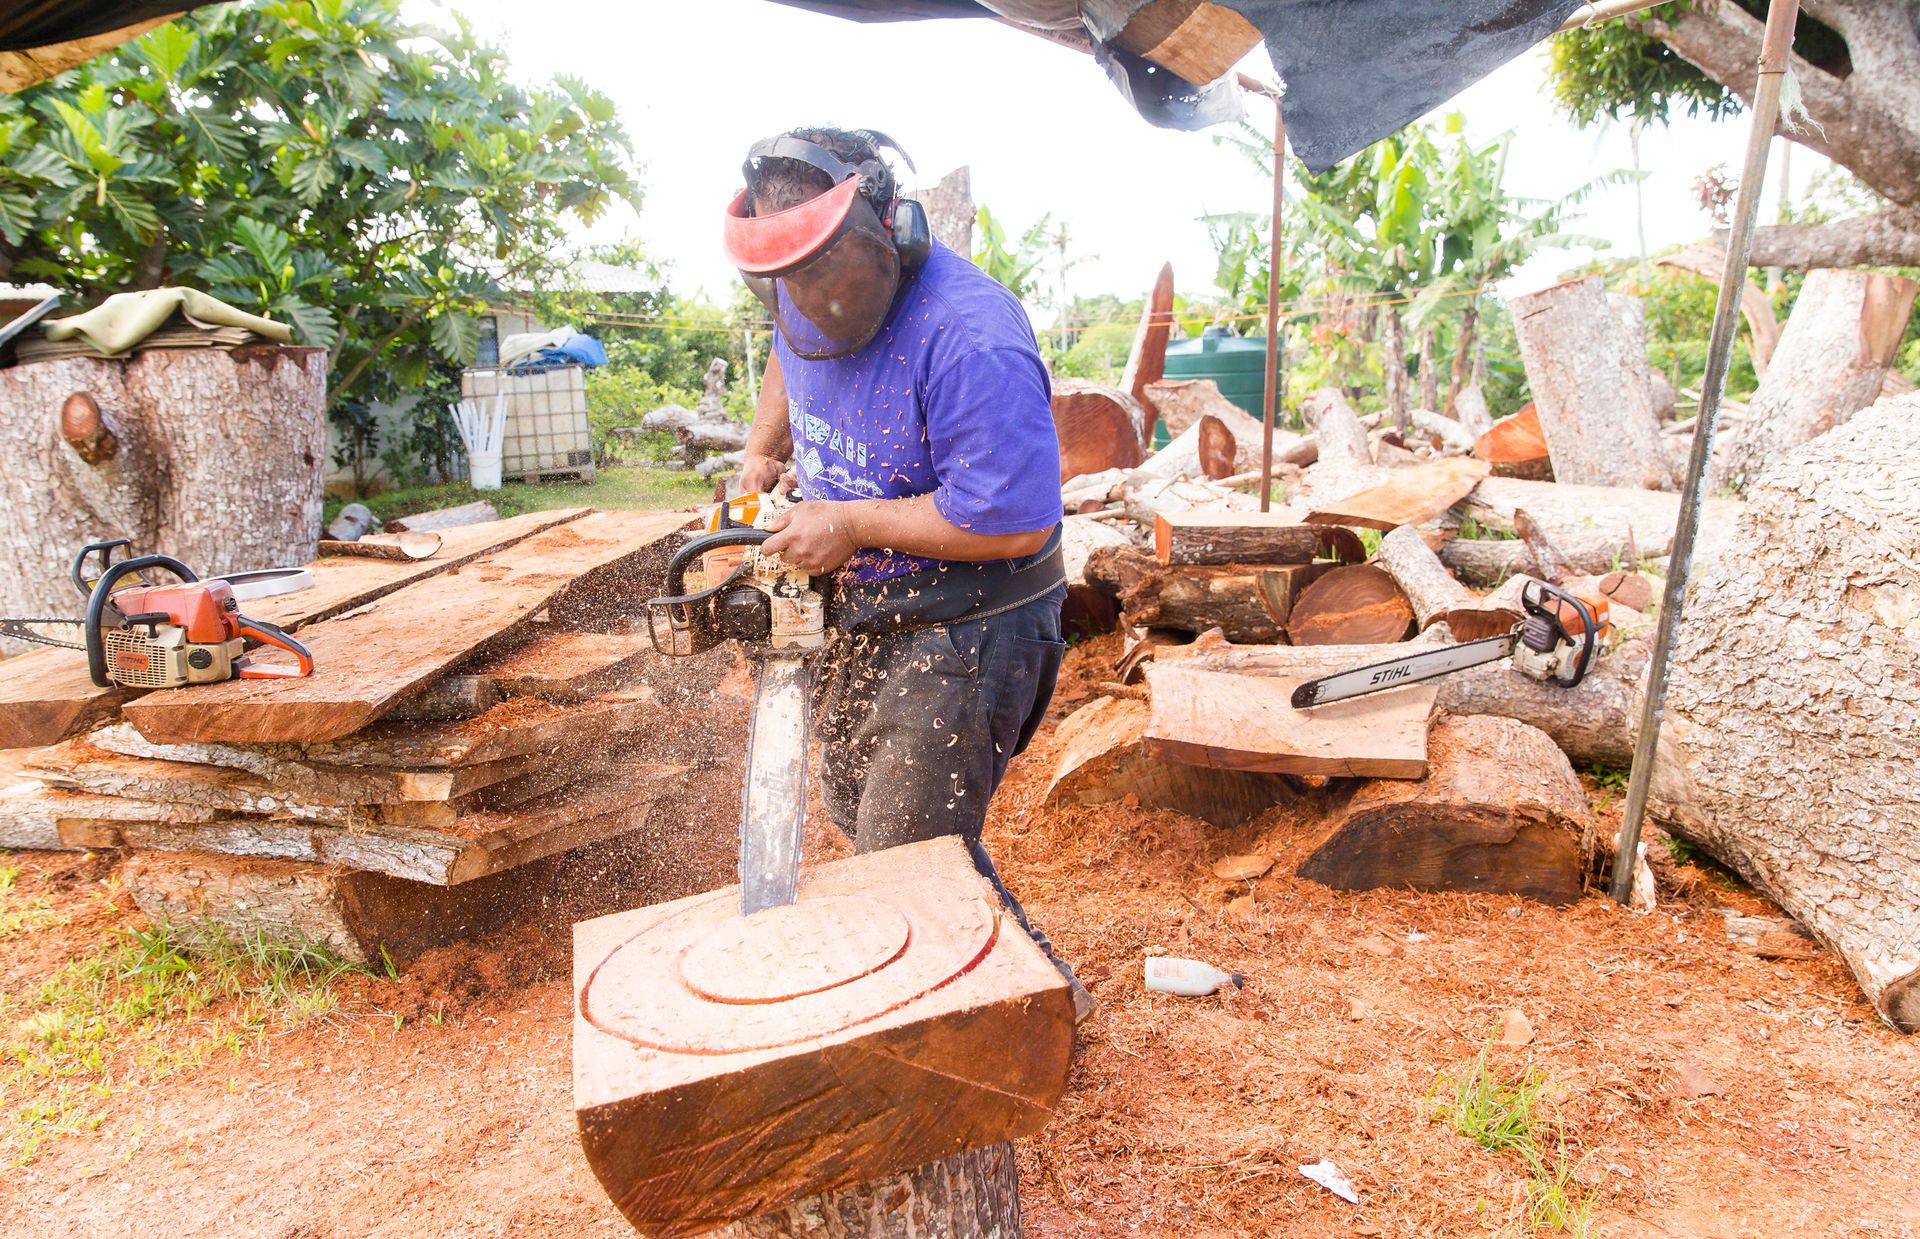 The combination of strength and finesse, plus the knowledge of his craft, have created opportunities for Feigna to travel to several countries to represent Tonga at carving and art festivals.